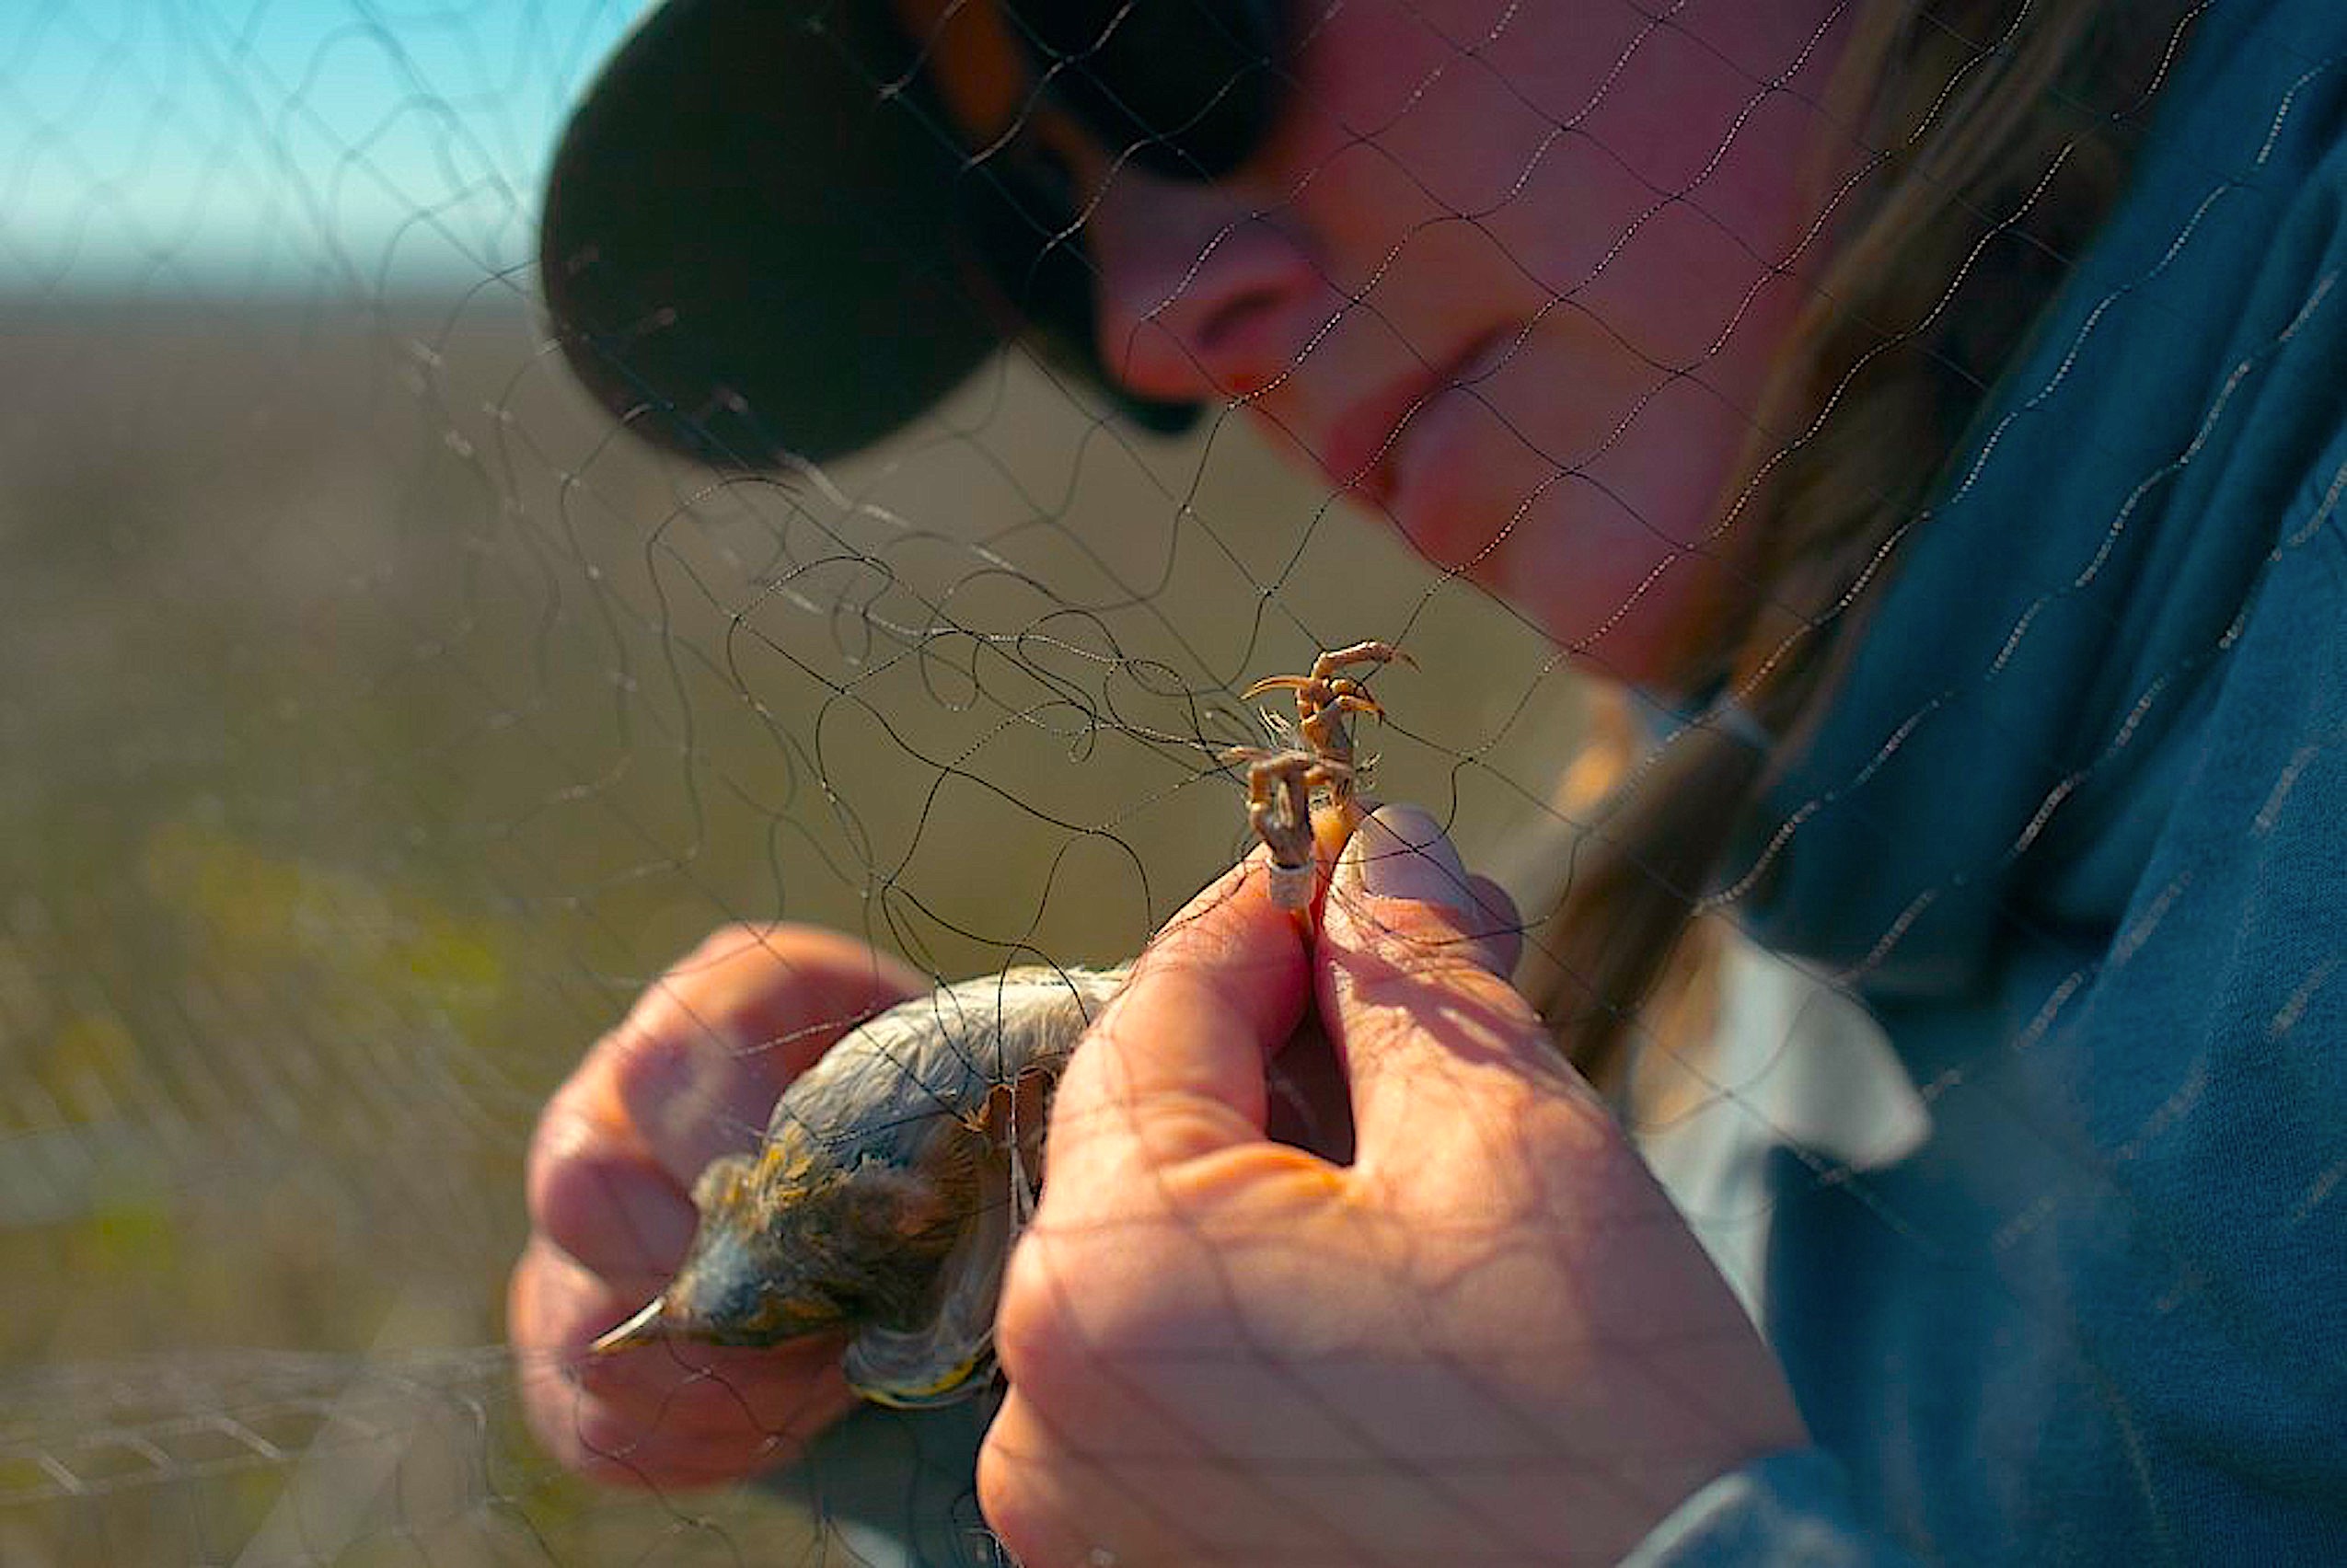 image: Marae Lindquist West extracts a marsh sparrow from a mist net. Credit: Boston Dang.